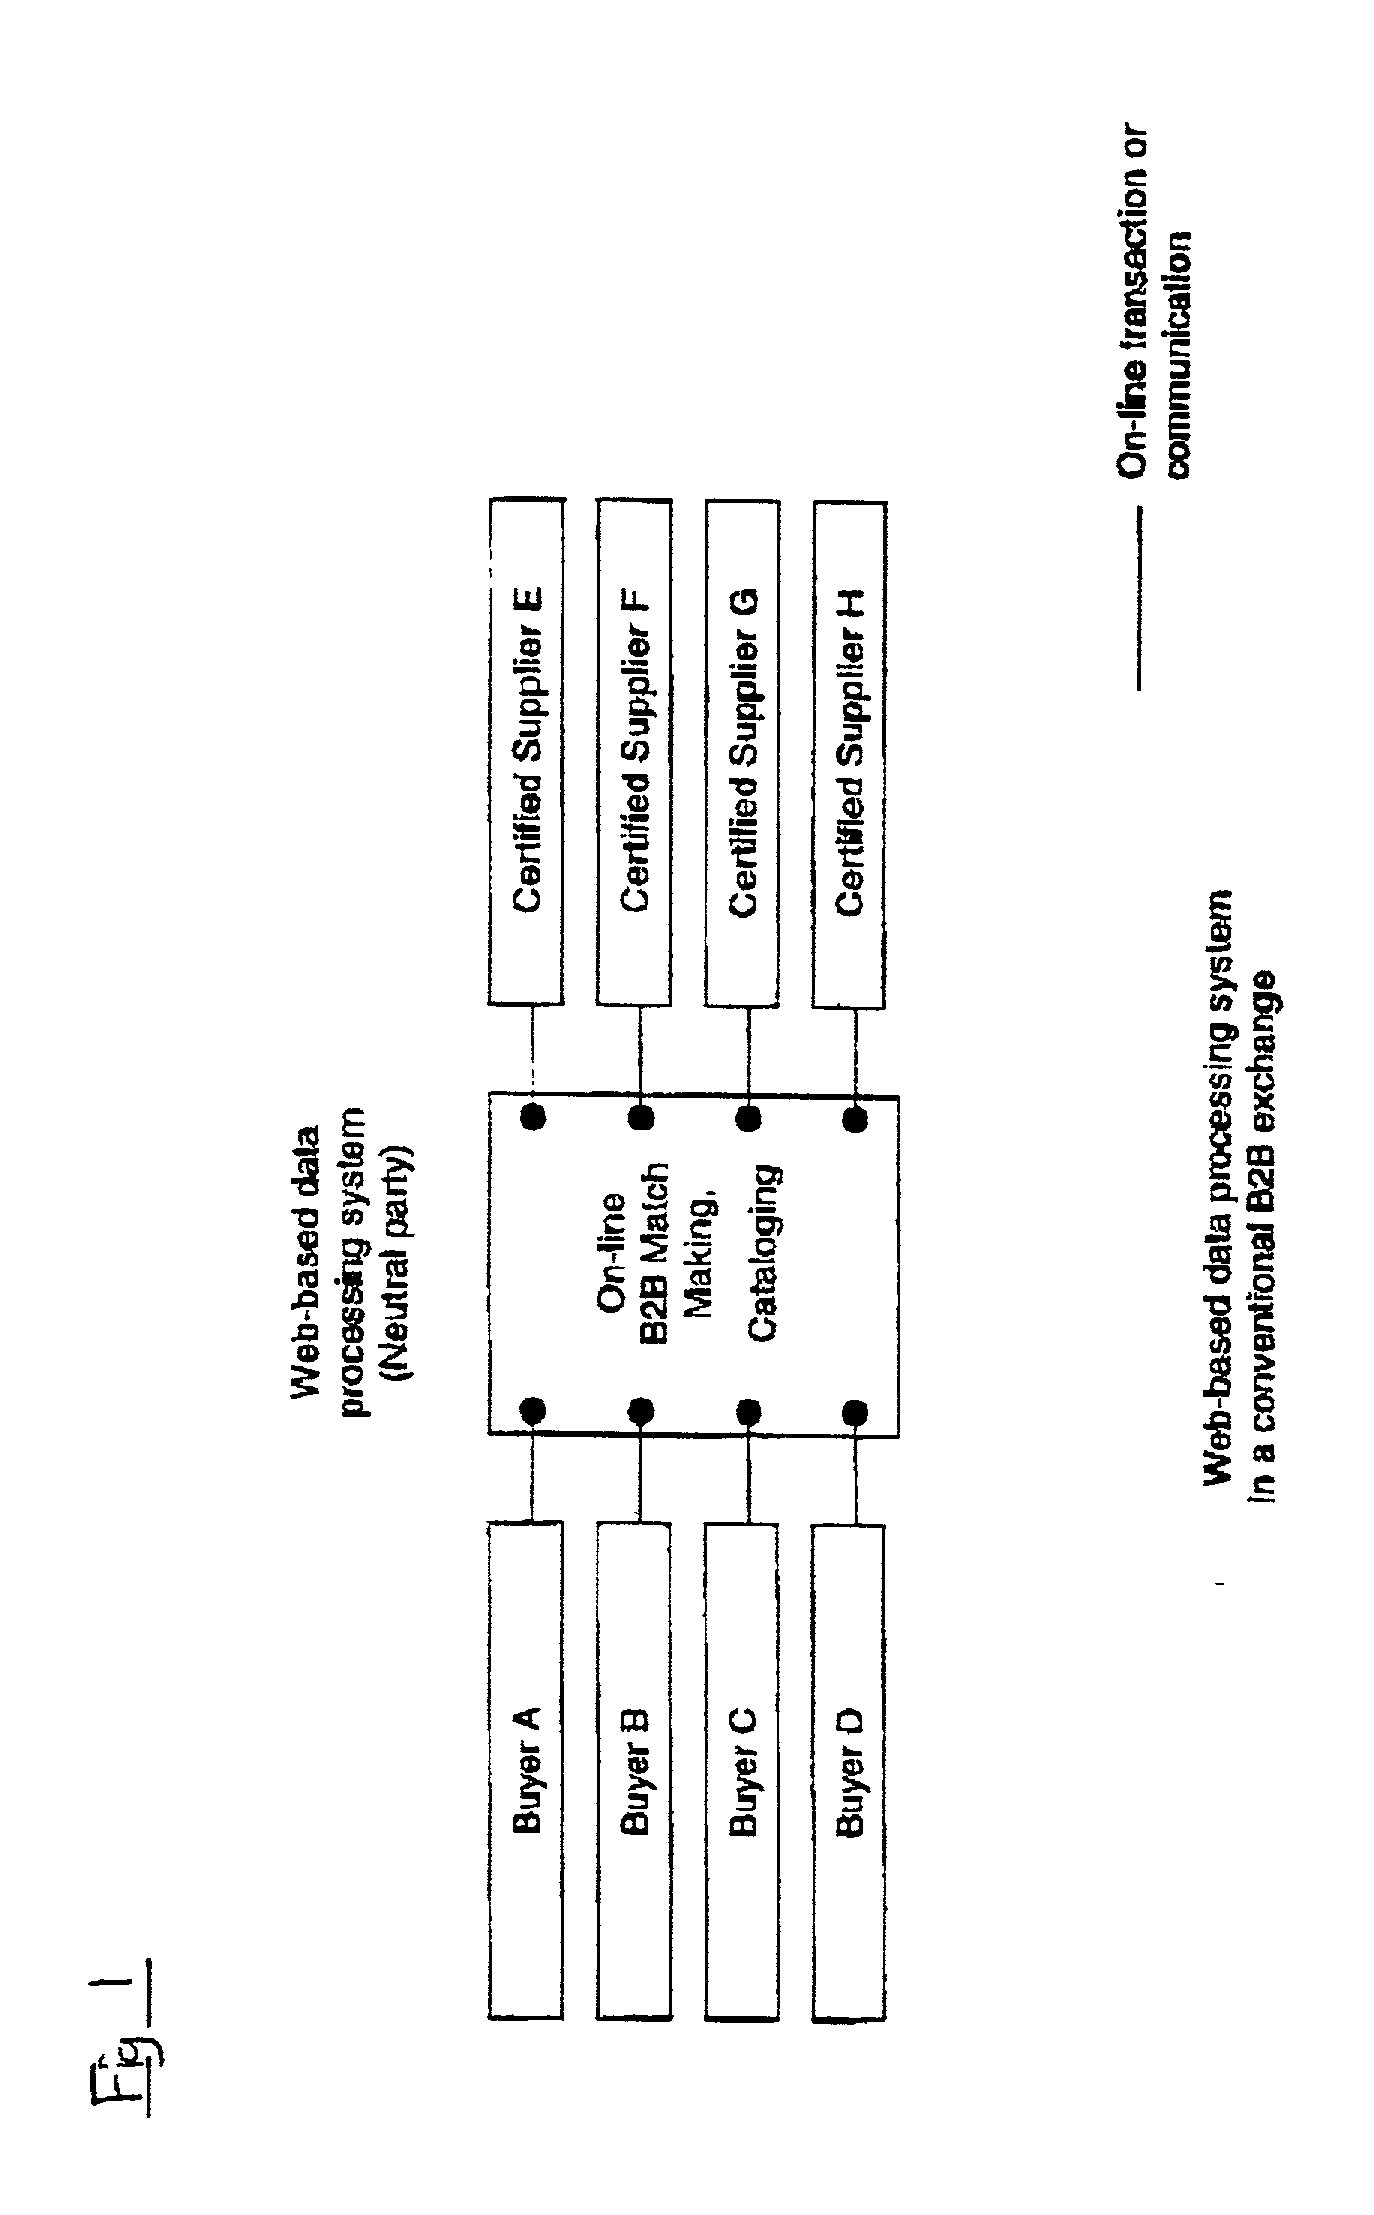 Data processing system for implementing an exchange